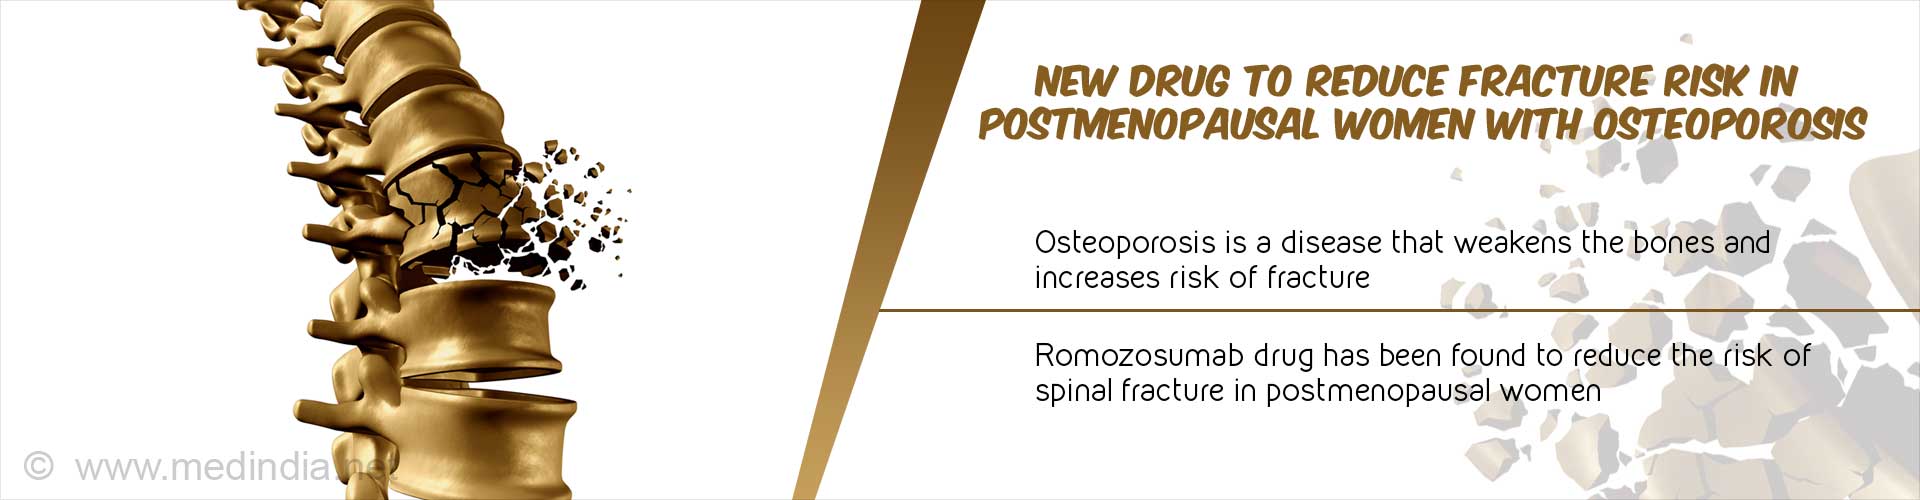 New drug to reduce fracture risk in postmenopausal women with osteoporosis
- Osteoporosis is a disease that weakens the bones and increases risk of fracture
- Romozosumab drug has been found to reduce the risk of spinal fracture in postmenopausal women